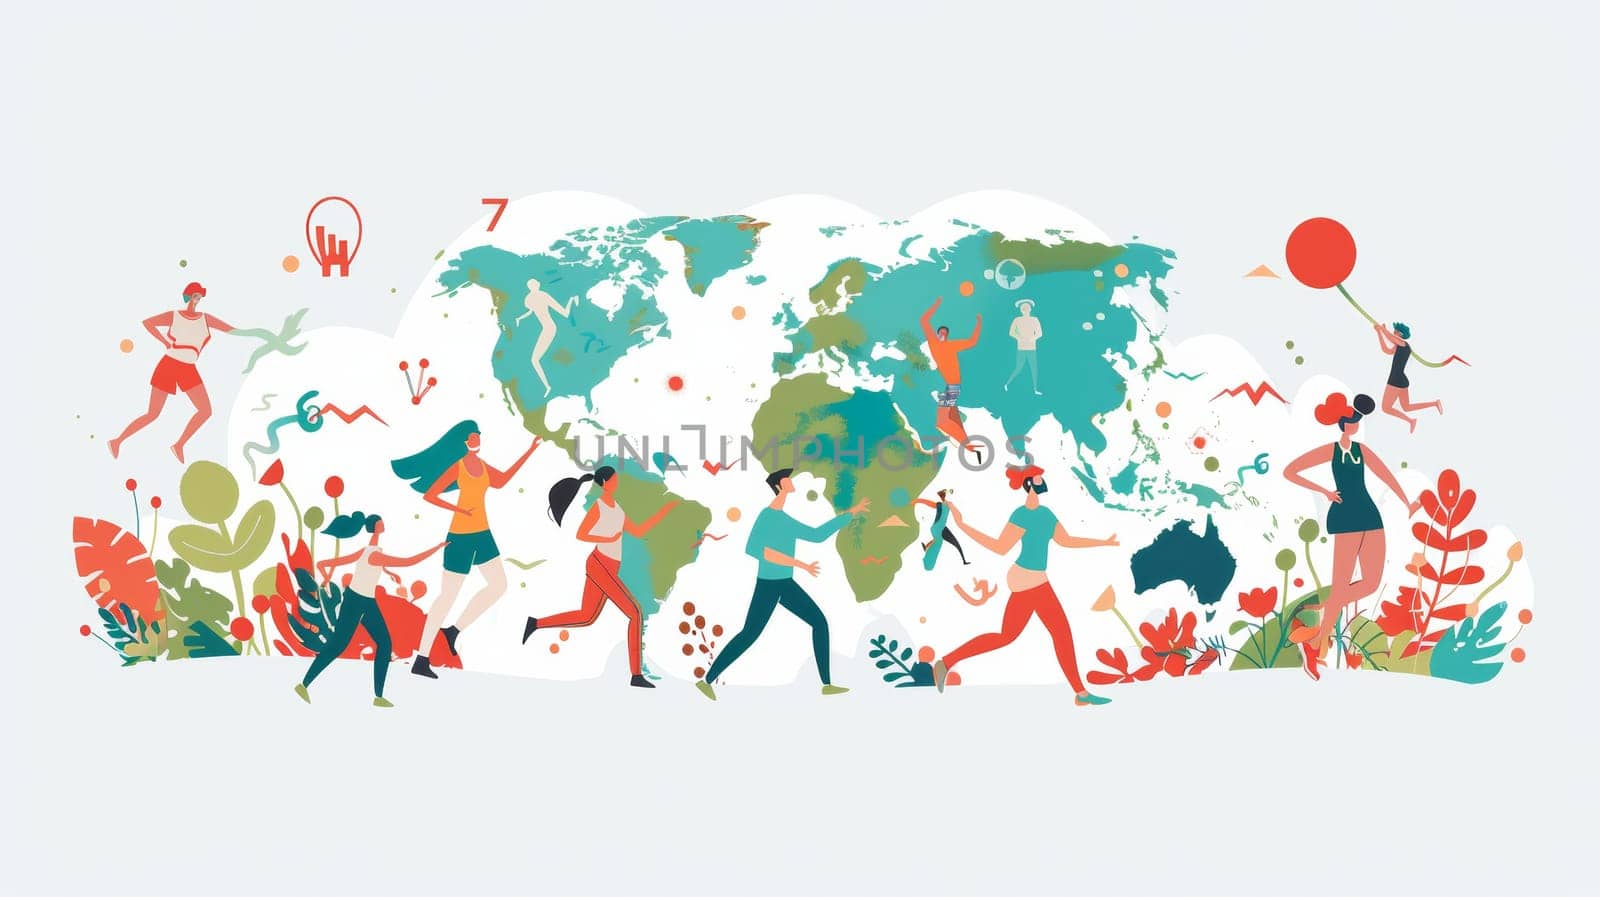 Concept of World Health Day on 7 April, with people working out, exercising, and earth in a comic doodle style. This drawing can be used for a website, banner, campaign, or social media post.